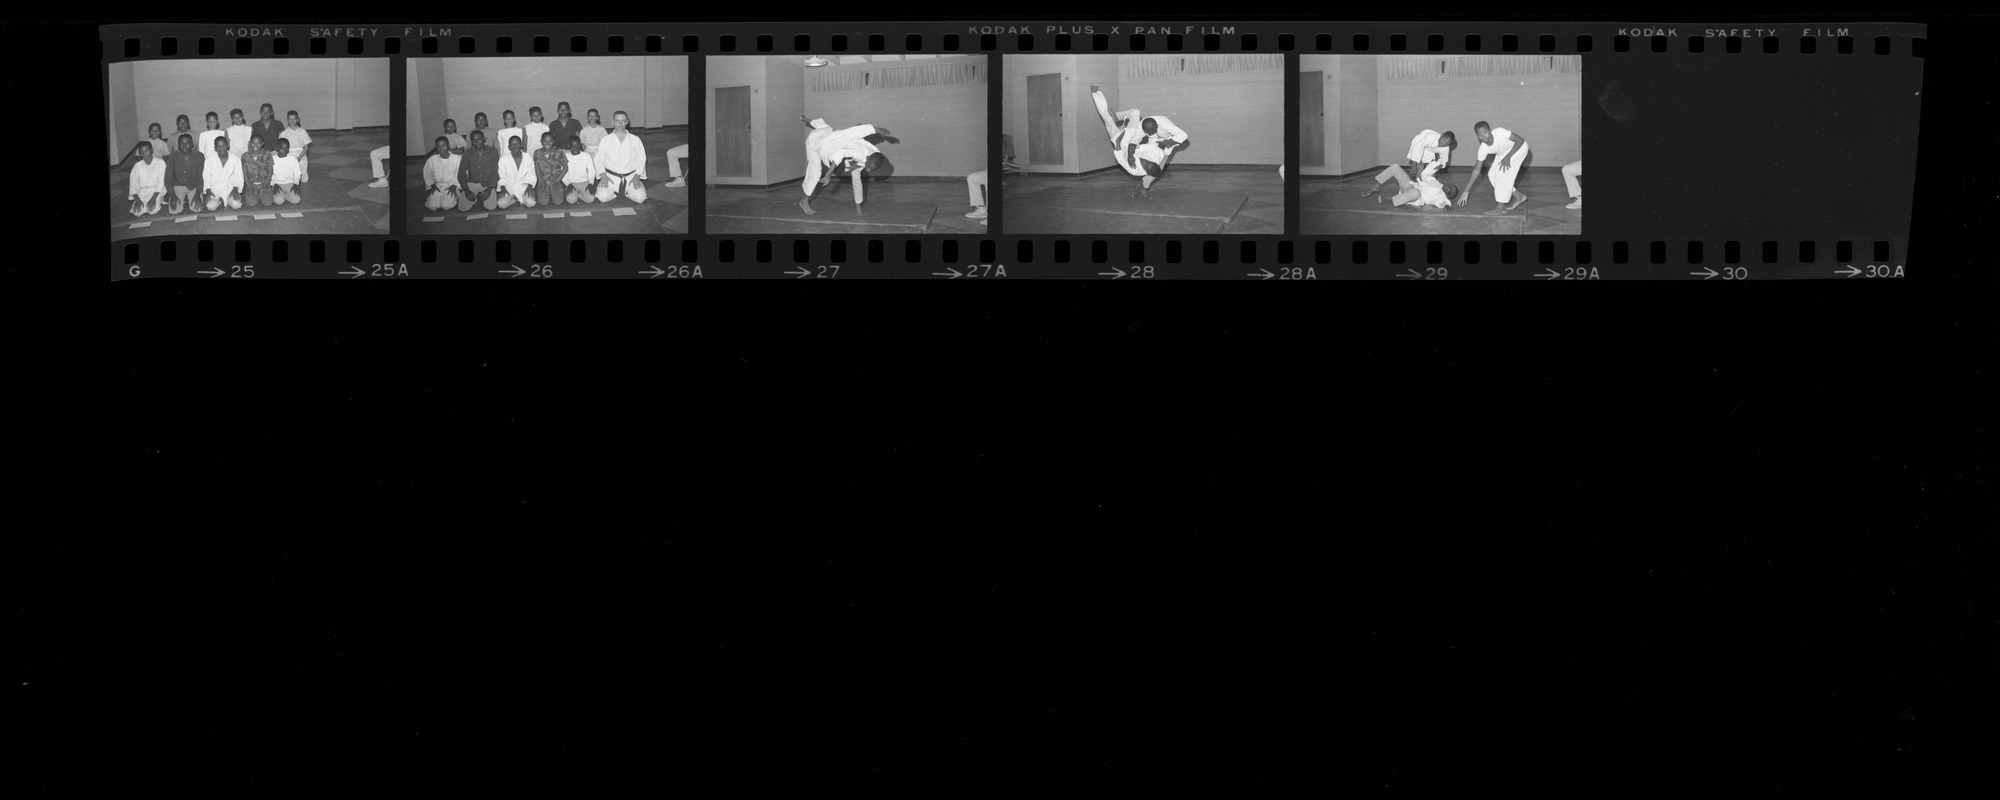 Set of negatives by Clinton Wright including Mrs. Daisy Buffington, Mrs. Burner's grandchild, Mrs. Simmons, A.M. & N. Alumni club, Checkmates at KC, Judo class at Jefferson, 1965, page 2